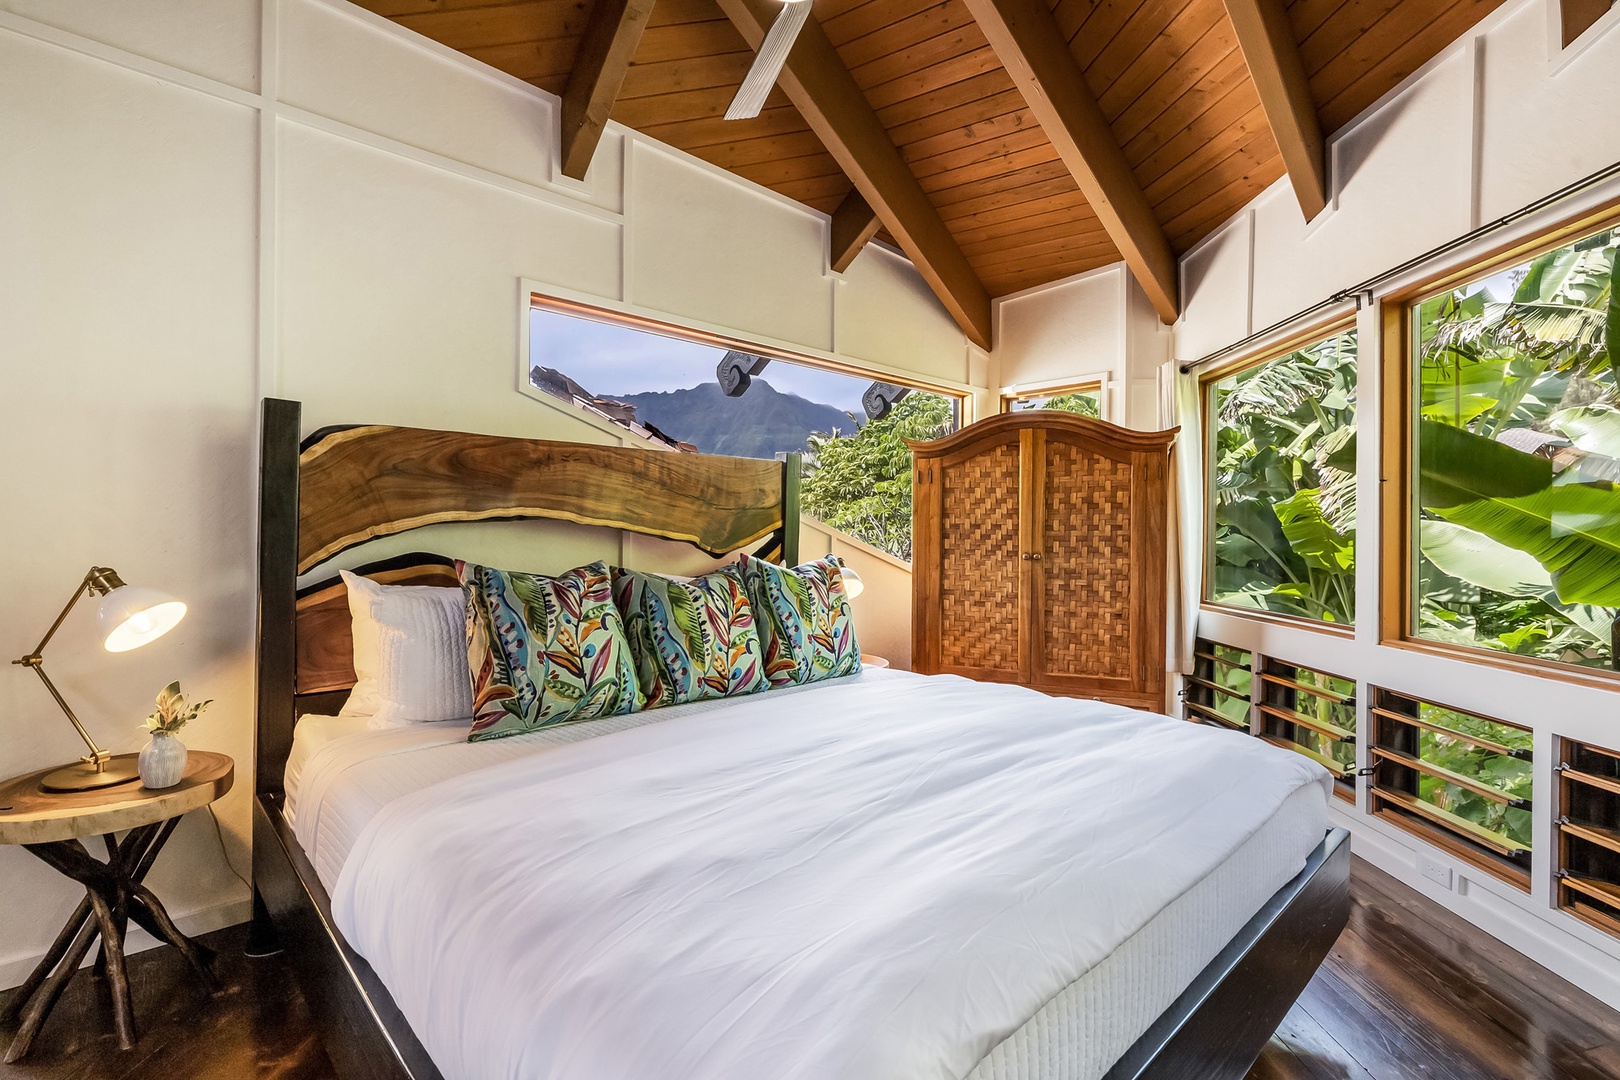 Waimanalo Vacation Rentals, Hawaii Hobbit House - Primary bedroom with king bed